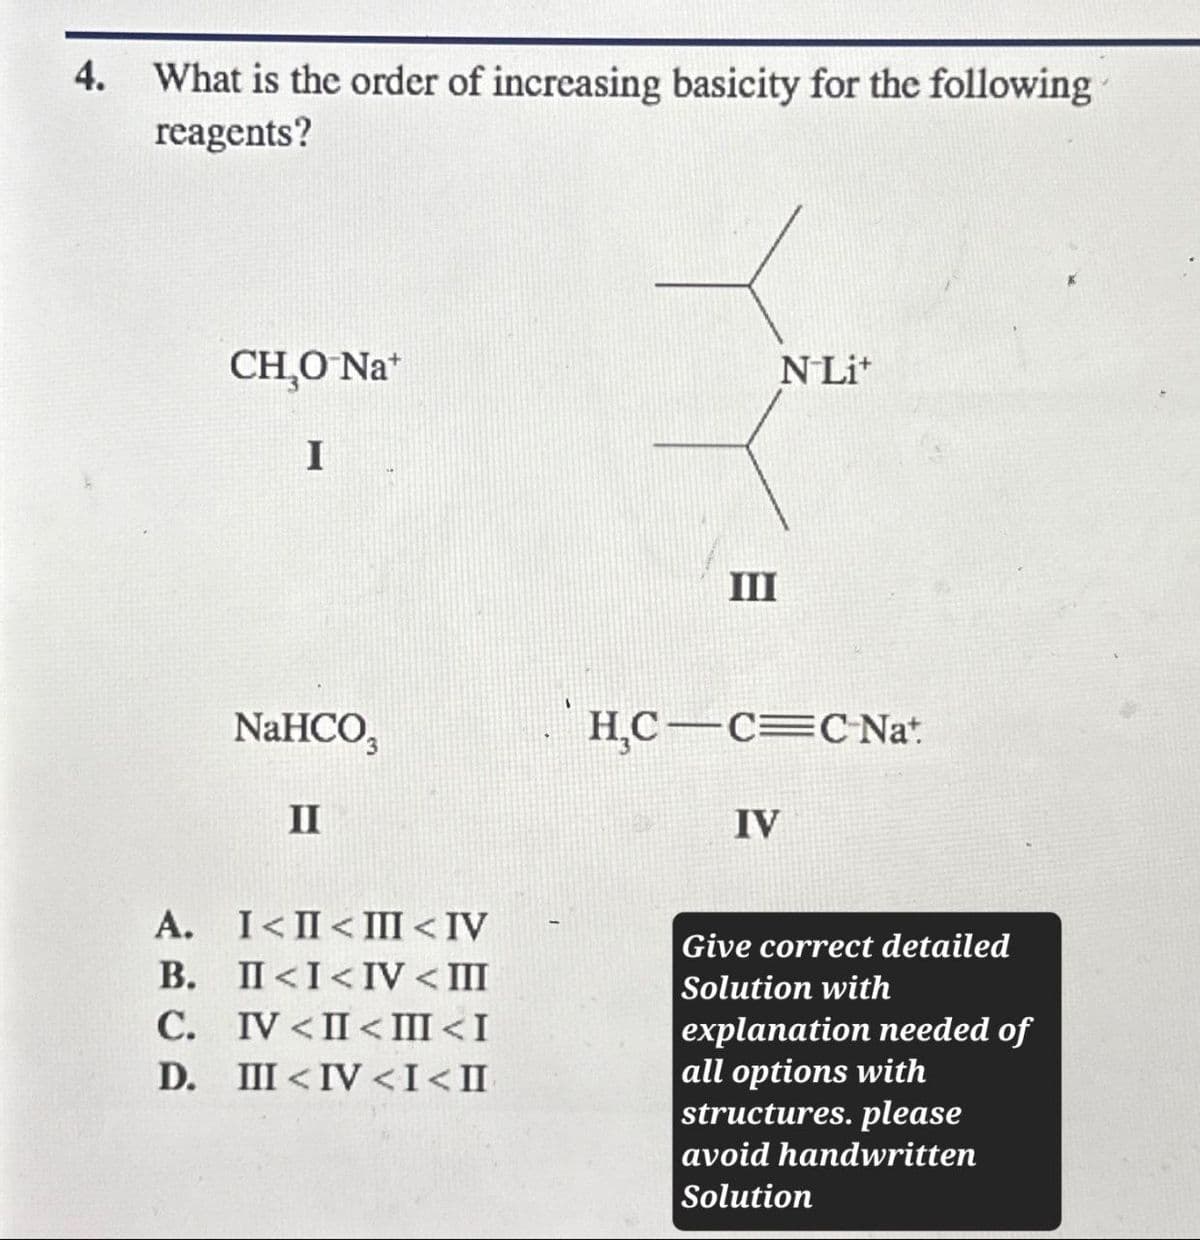 4. What is the order of increasing basicity for the following
reagents?
CH₂O-Na+
NLi
I
NaHCO3
II
III
H,C C C Nat
IV
A.
B.
C.
D.
I<II<III<IV
II<I<IV < III
IV <IIIII<I
III<IV <I<II
Give correct detailed
Solution with
explanation needed of
all options with
structures. please
avoid handwritten
Solution